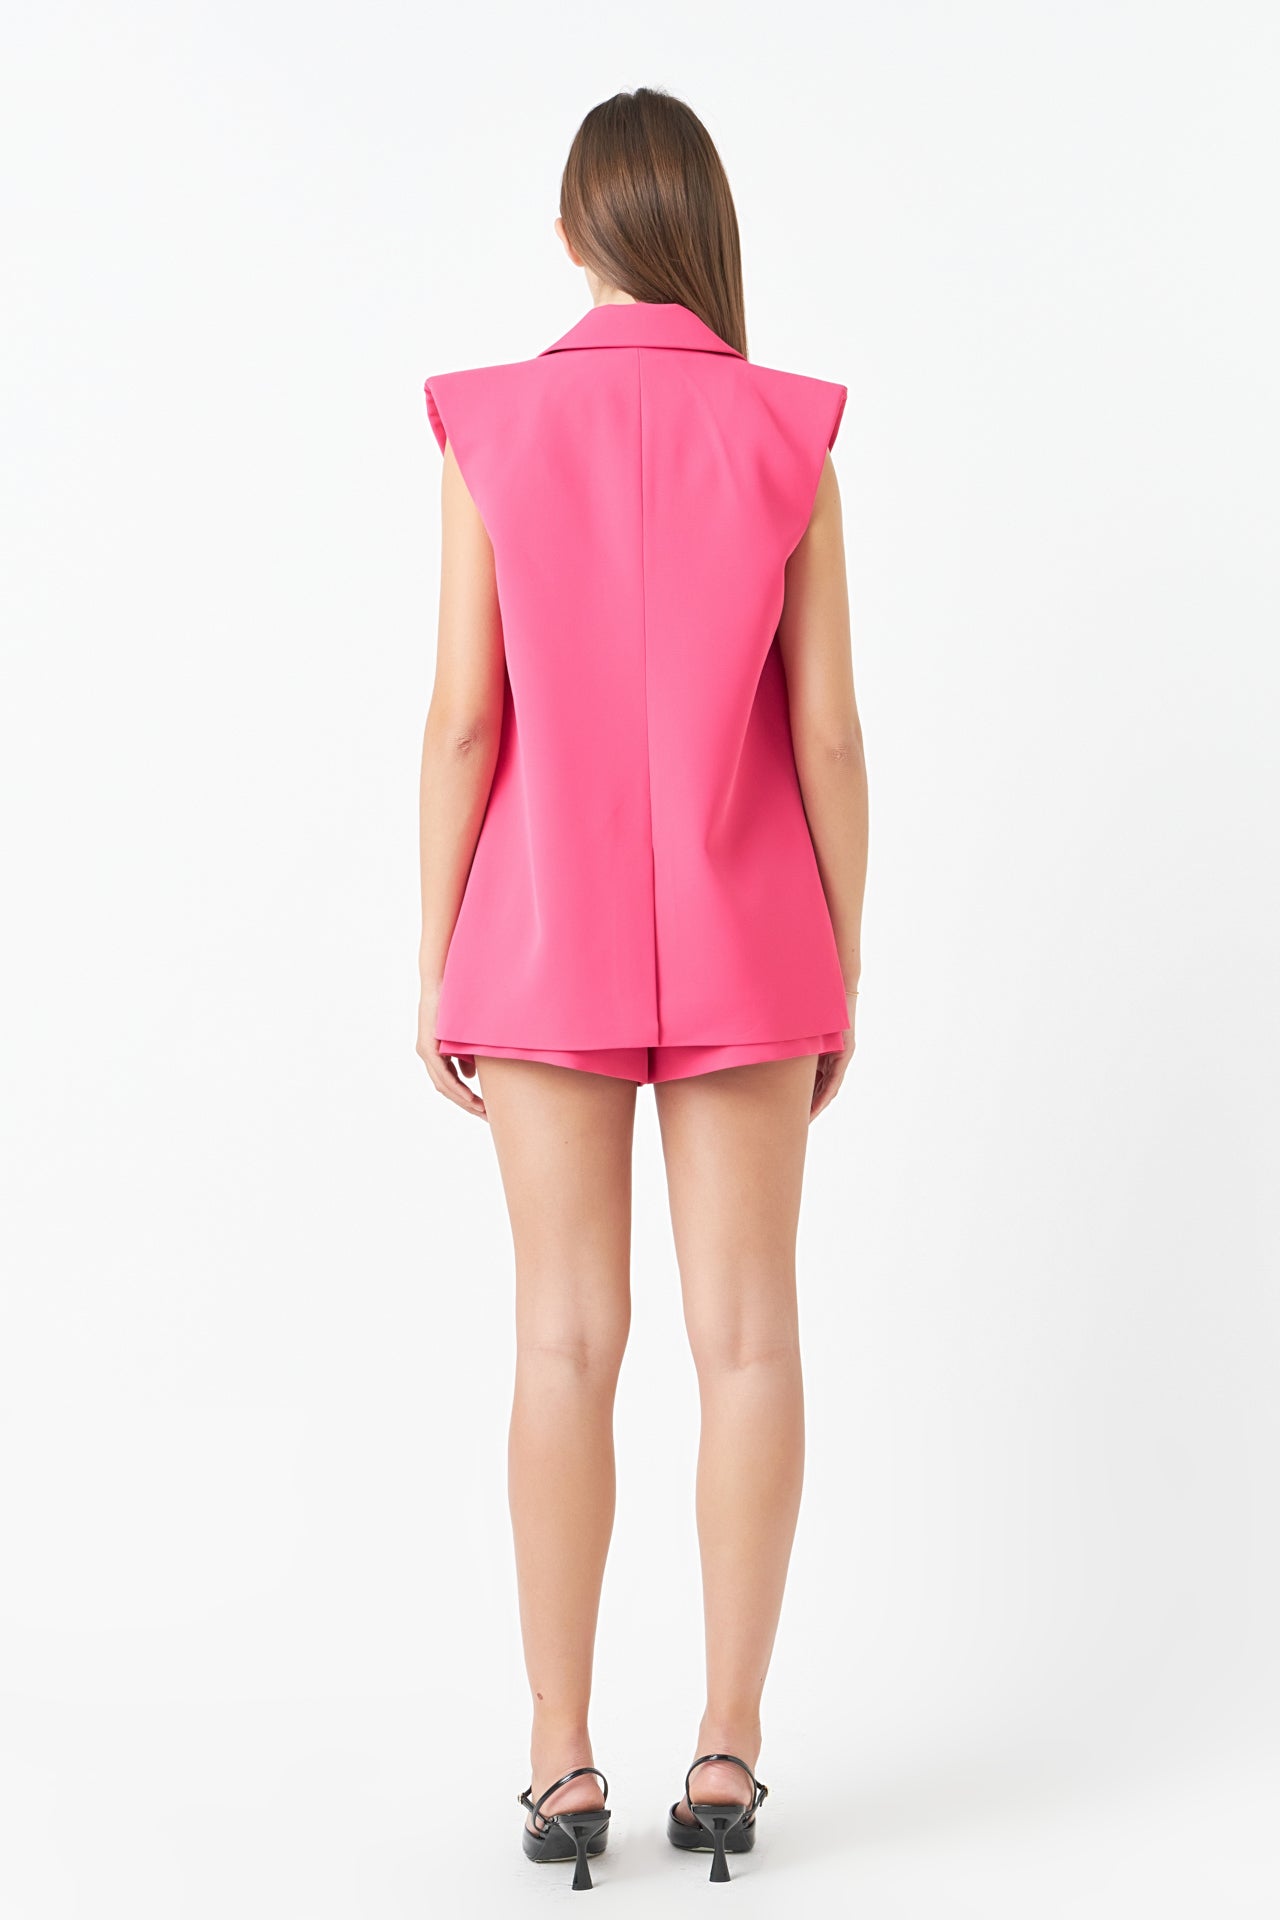 ENDLESS ROSE - Oversize Vest Blazer - BLAZERS available at Objectrare